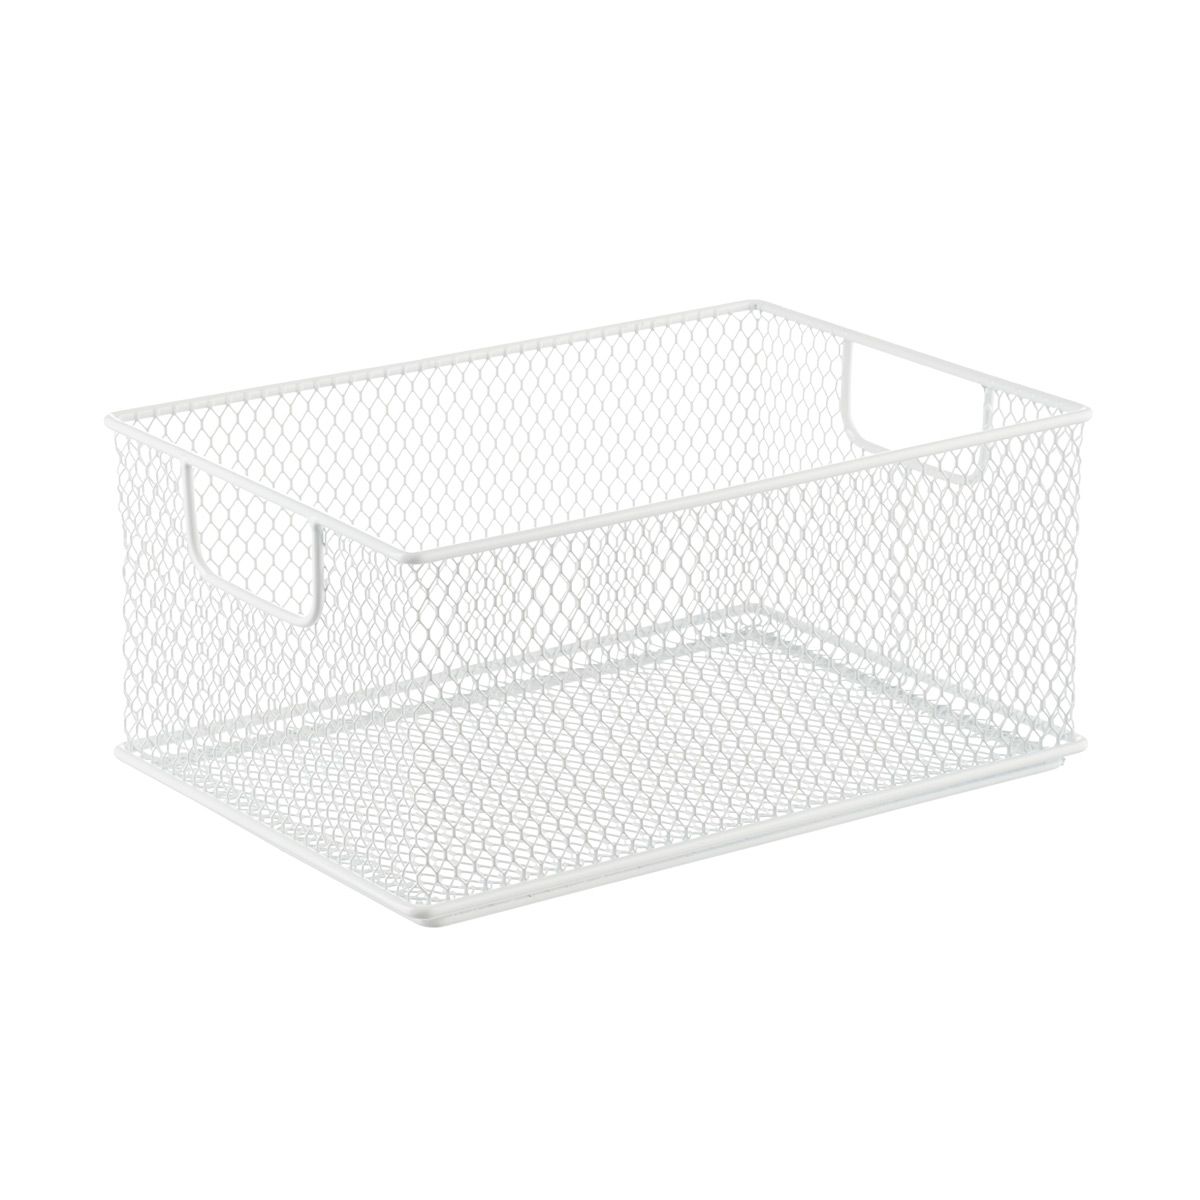 Large Omaha Stacking Bin White | The Container Store